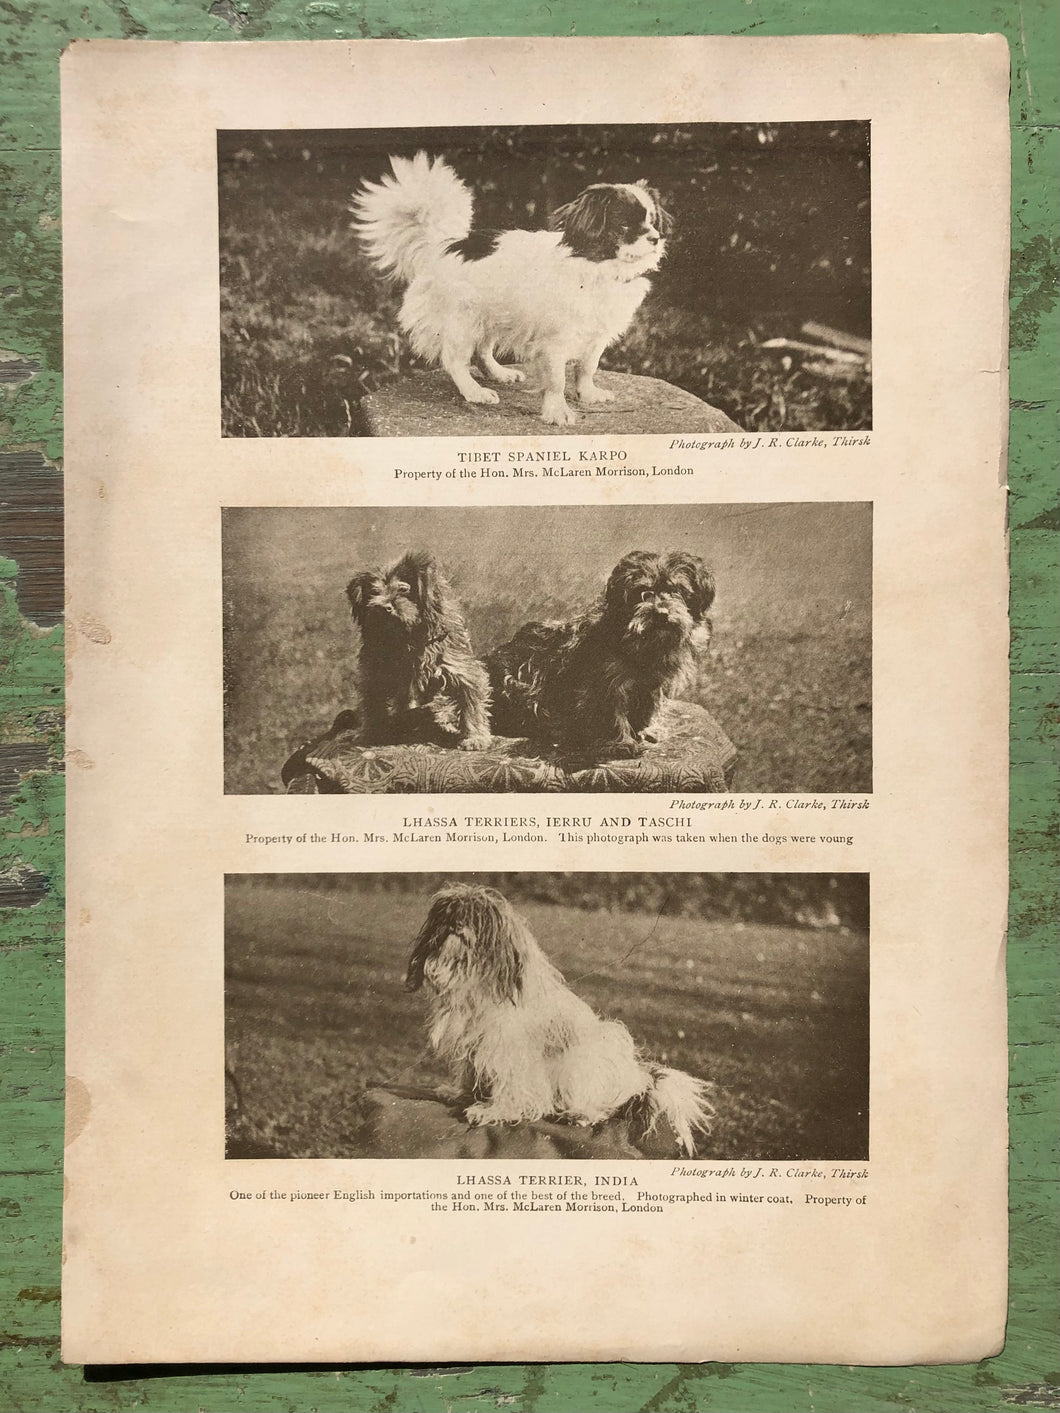 Lhassa Terrier and Tibet Spaniel Print from The Dog Book by James Watson